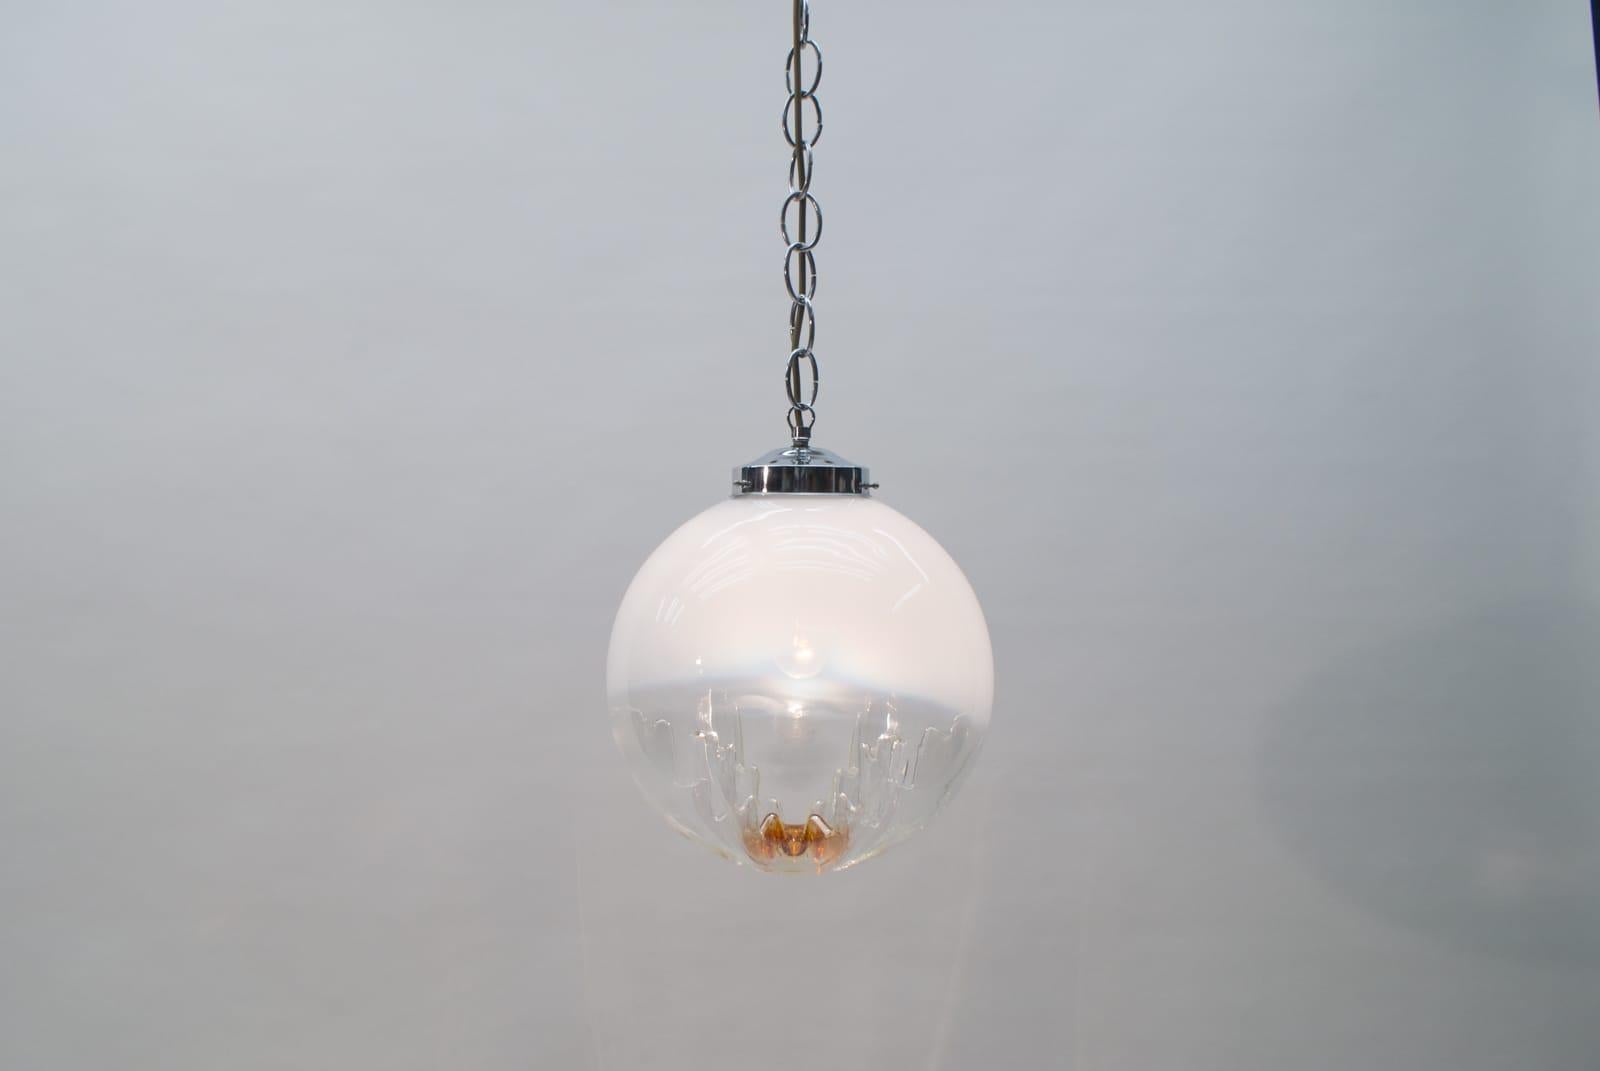 A beautiful glass lamp.
A touch of shadow play and transparency gives the lamp a wonderful lightness and elegance.
Designed in the 1960s in Italy for Mazzega.
The lamp need 1 x E27 Edison screw fit bulb. Its wired, in working condition and run